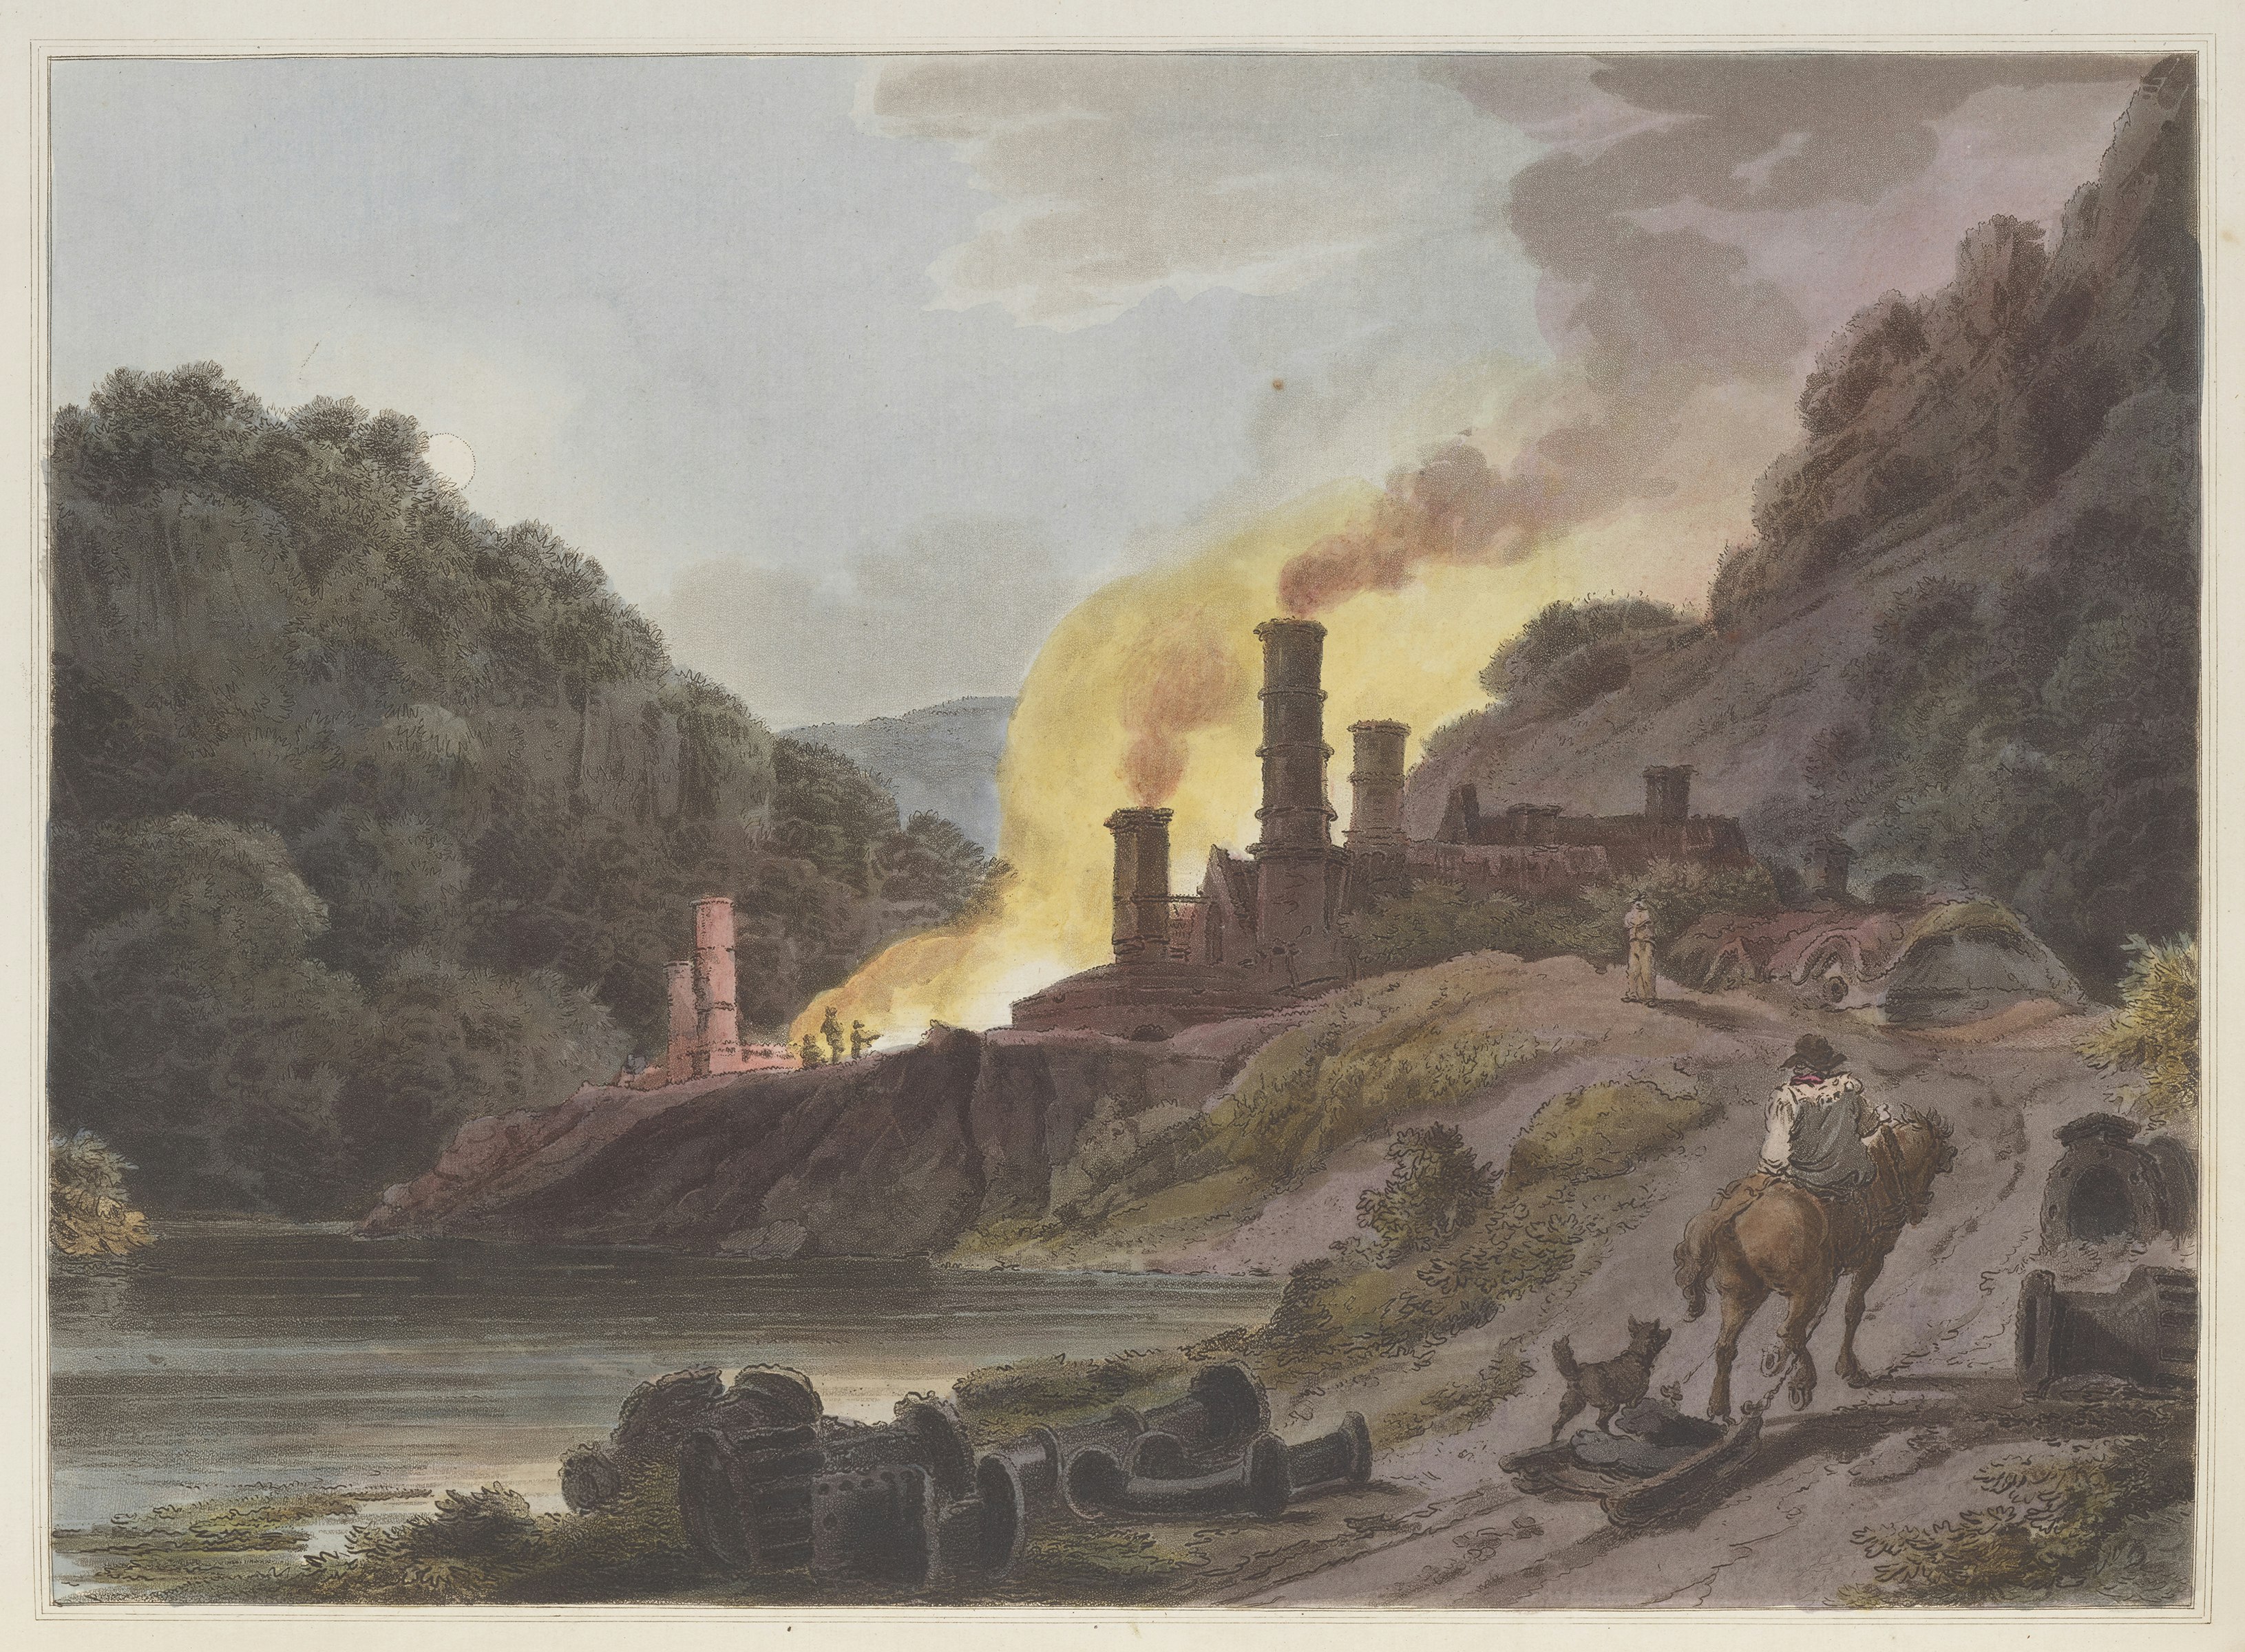 A painting. In the middle ground is a factory with smoking chimneys and a large fire. In the foreground is a man on a horse with a dog. There is a river and trees on the left hand side.